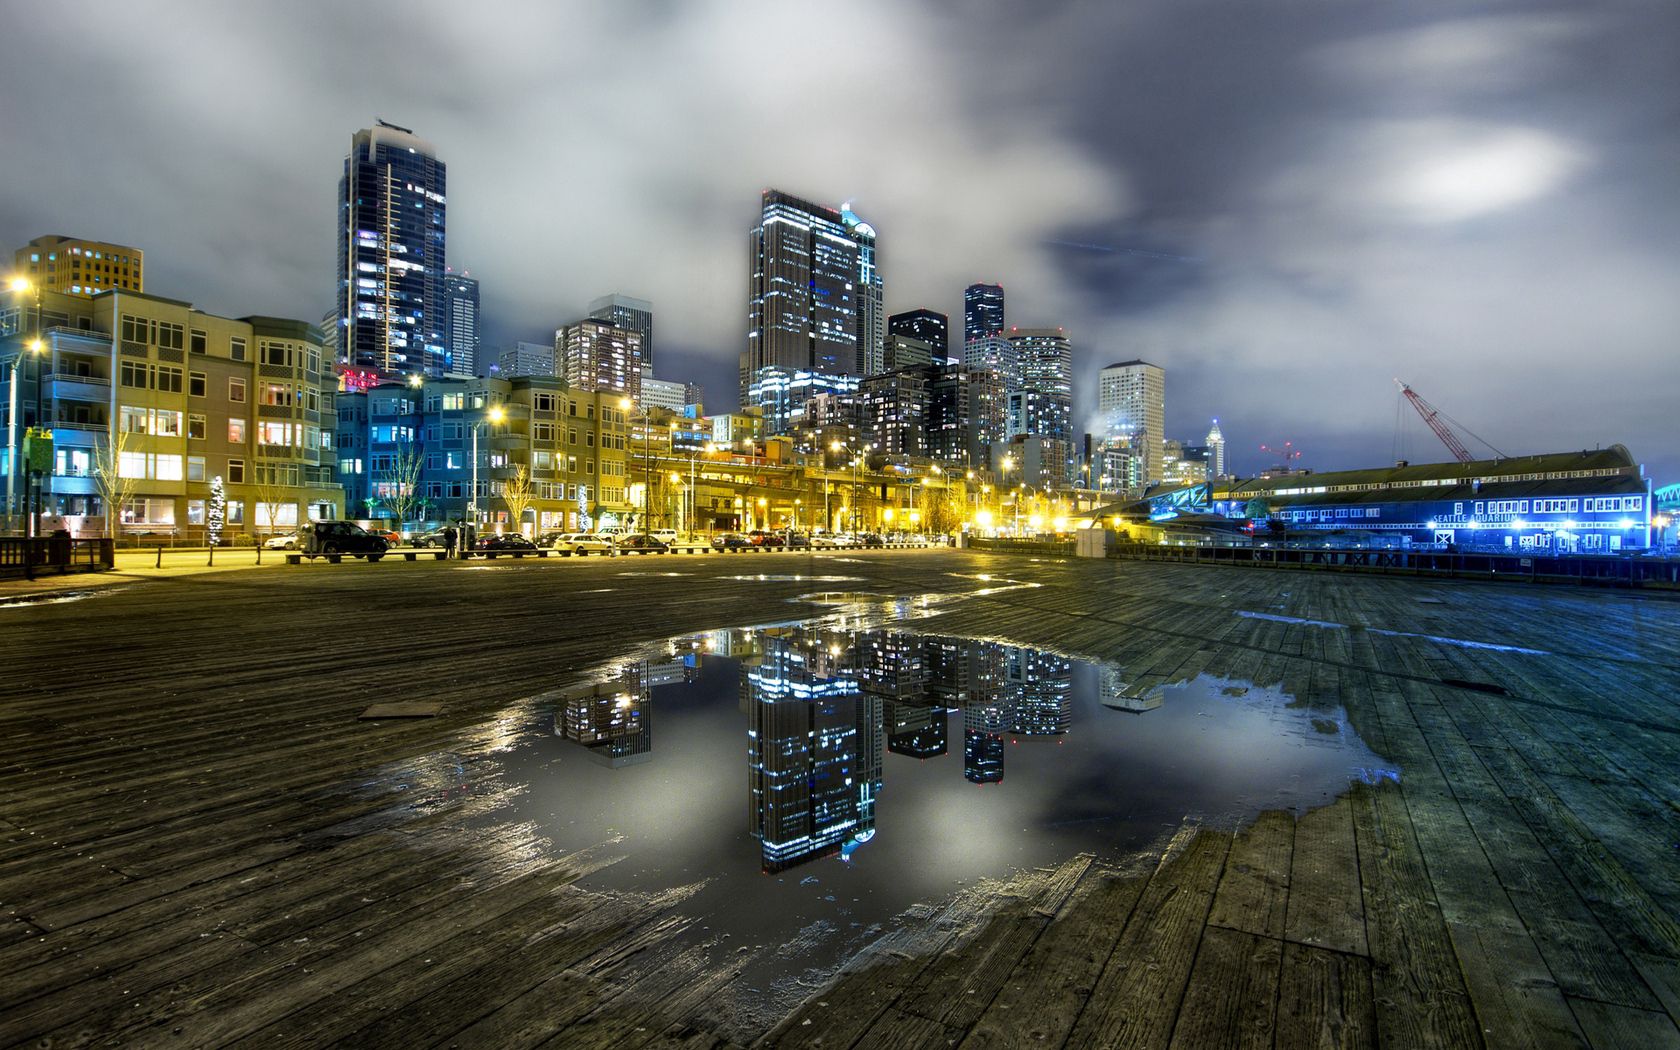 united states, cities, usa, city, lights, reflection, morning, hdr, puddle, planks, board, seattle, grey sky, grey skies